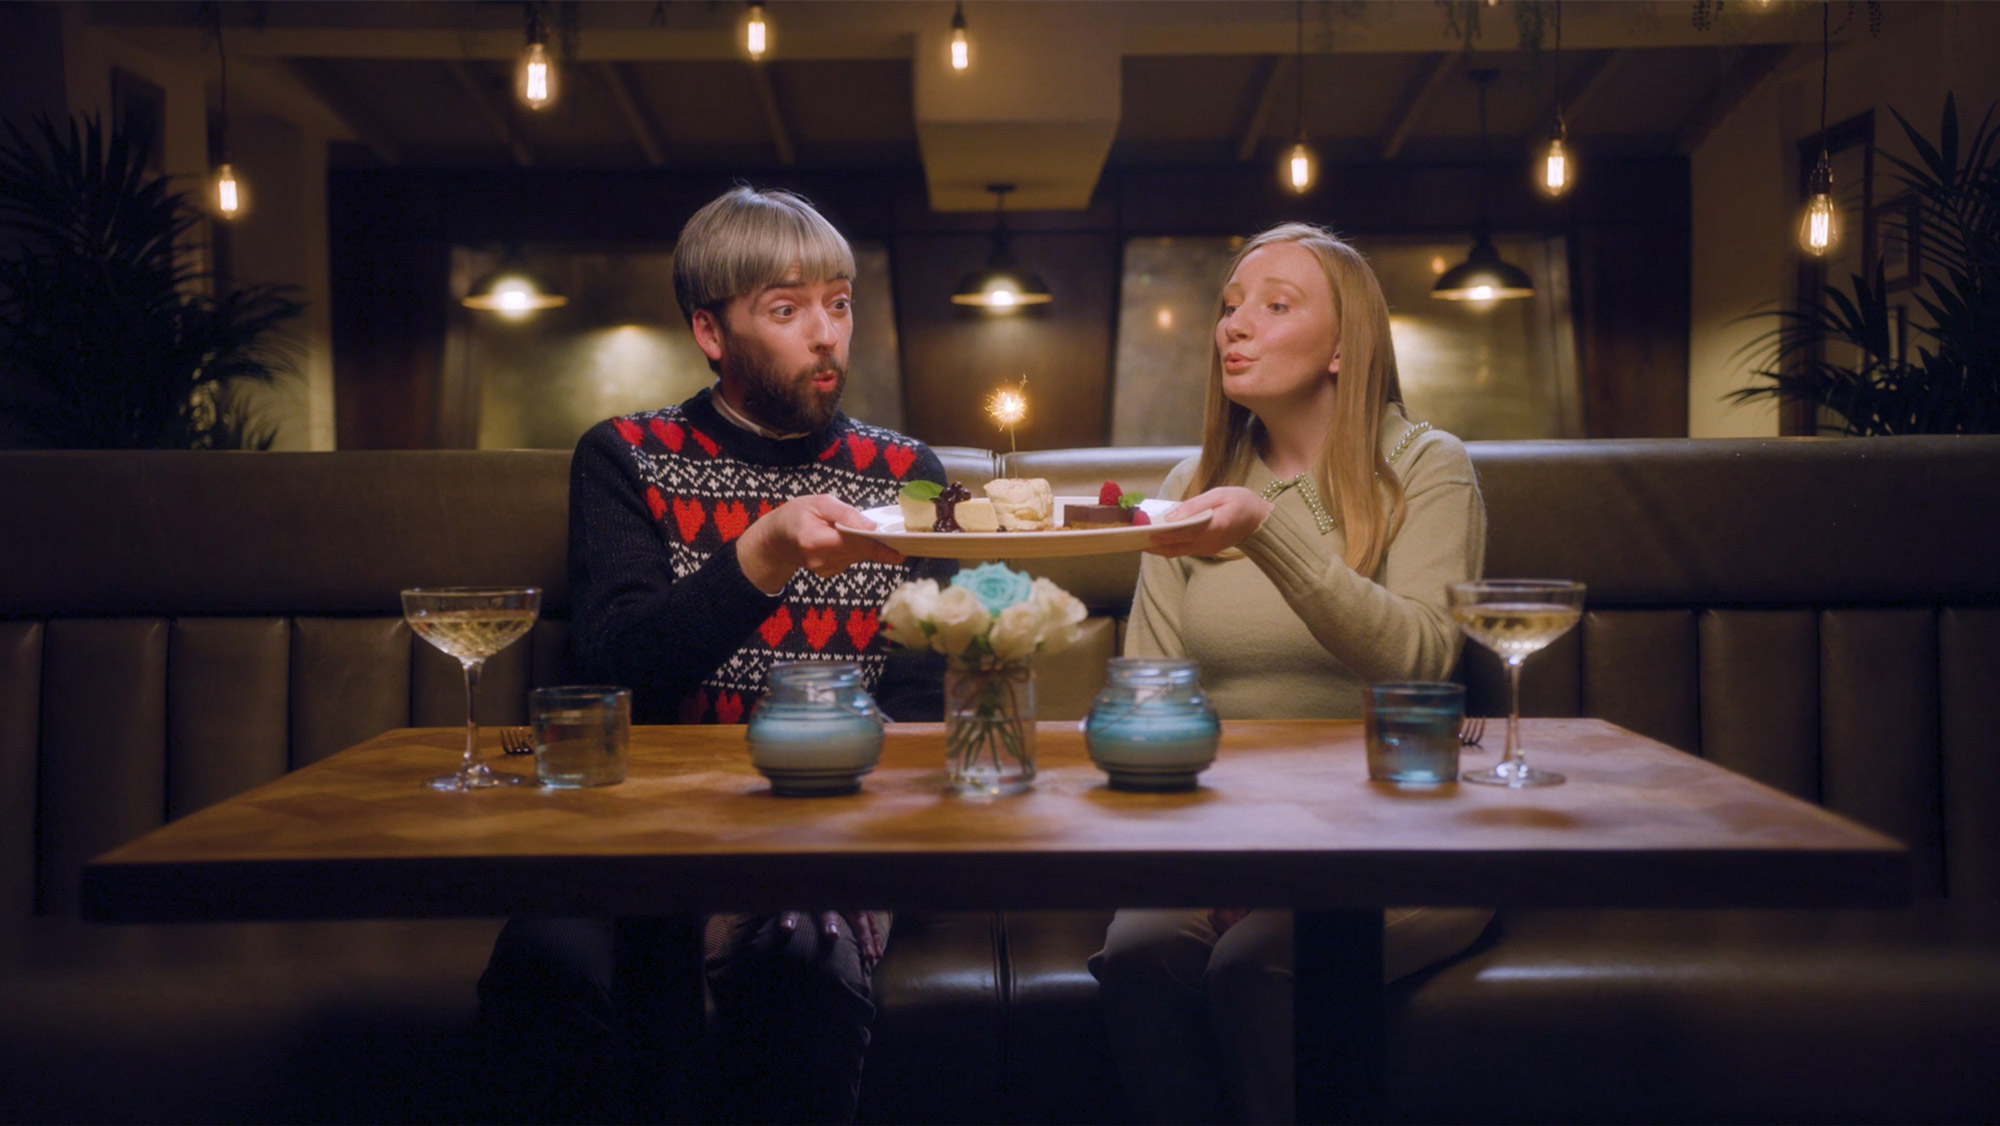 A male and female couple in a restaurant on Valentine's Day blowing out a sparkler on top of a dessert plate in a Buy A Gift ad, from the Rise Media case studies archive